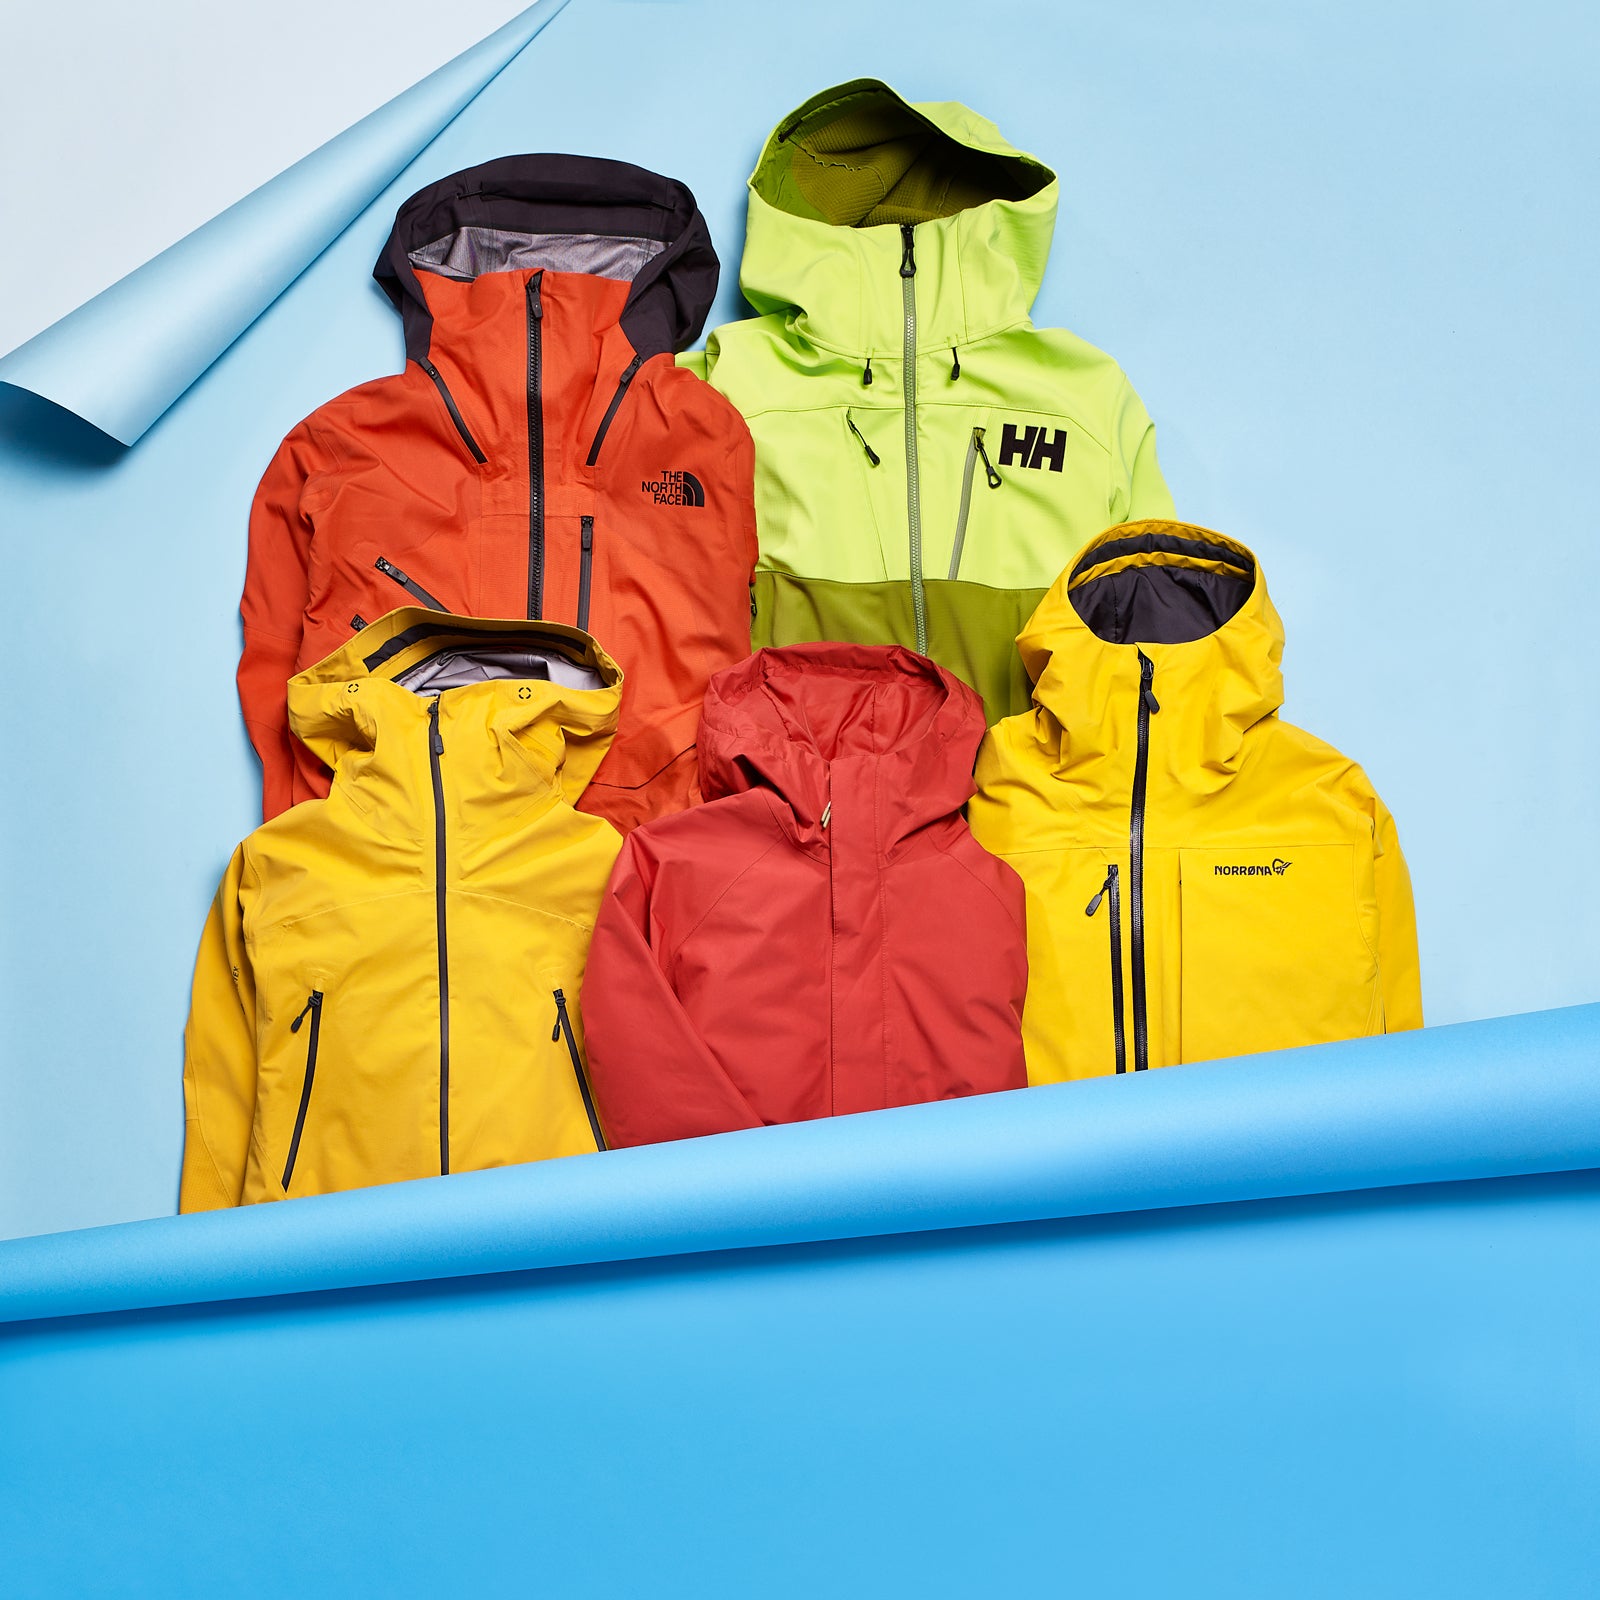 The Ski Jackets That Transformed Our Powder Days